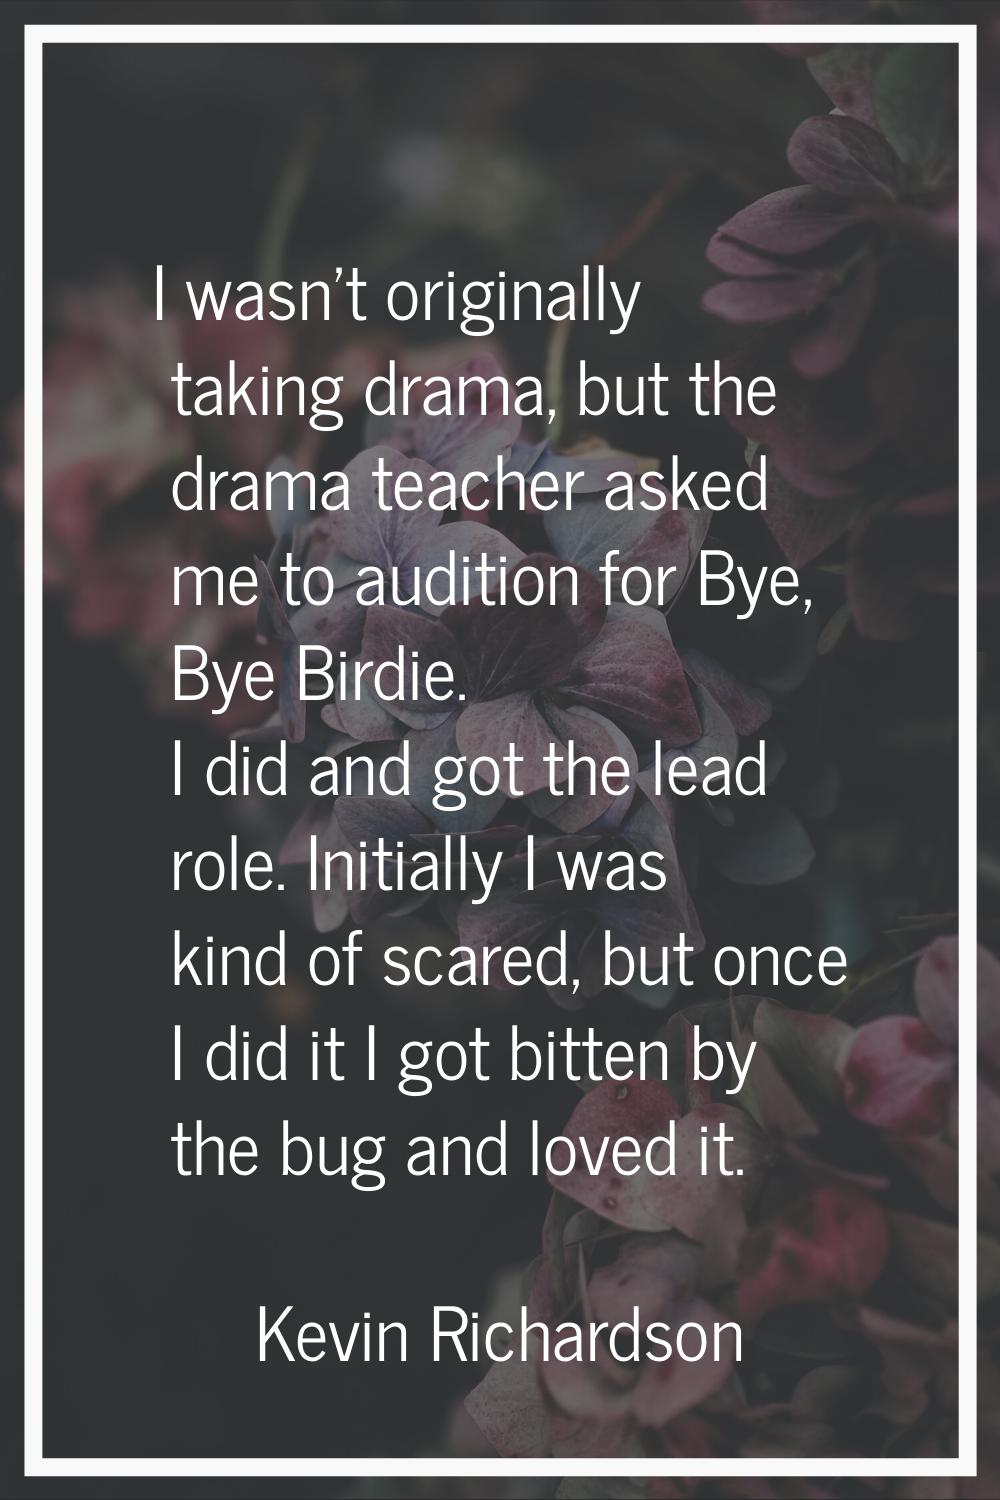 I wasn't originally taking drama, but the drama teacher asked me to audition for Bye, Bye Birdie. I